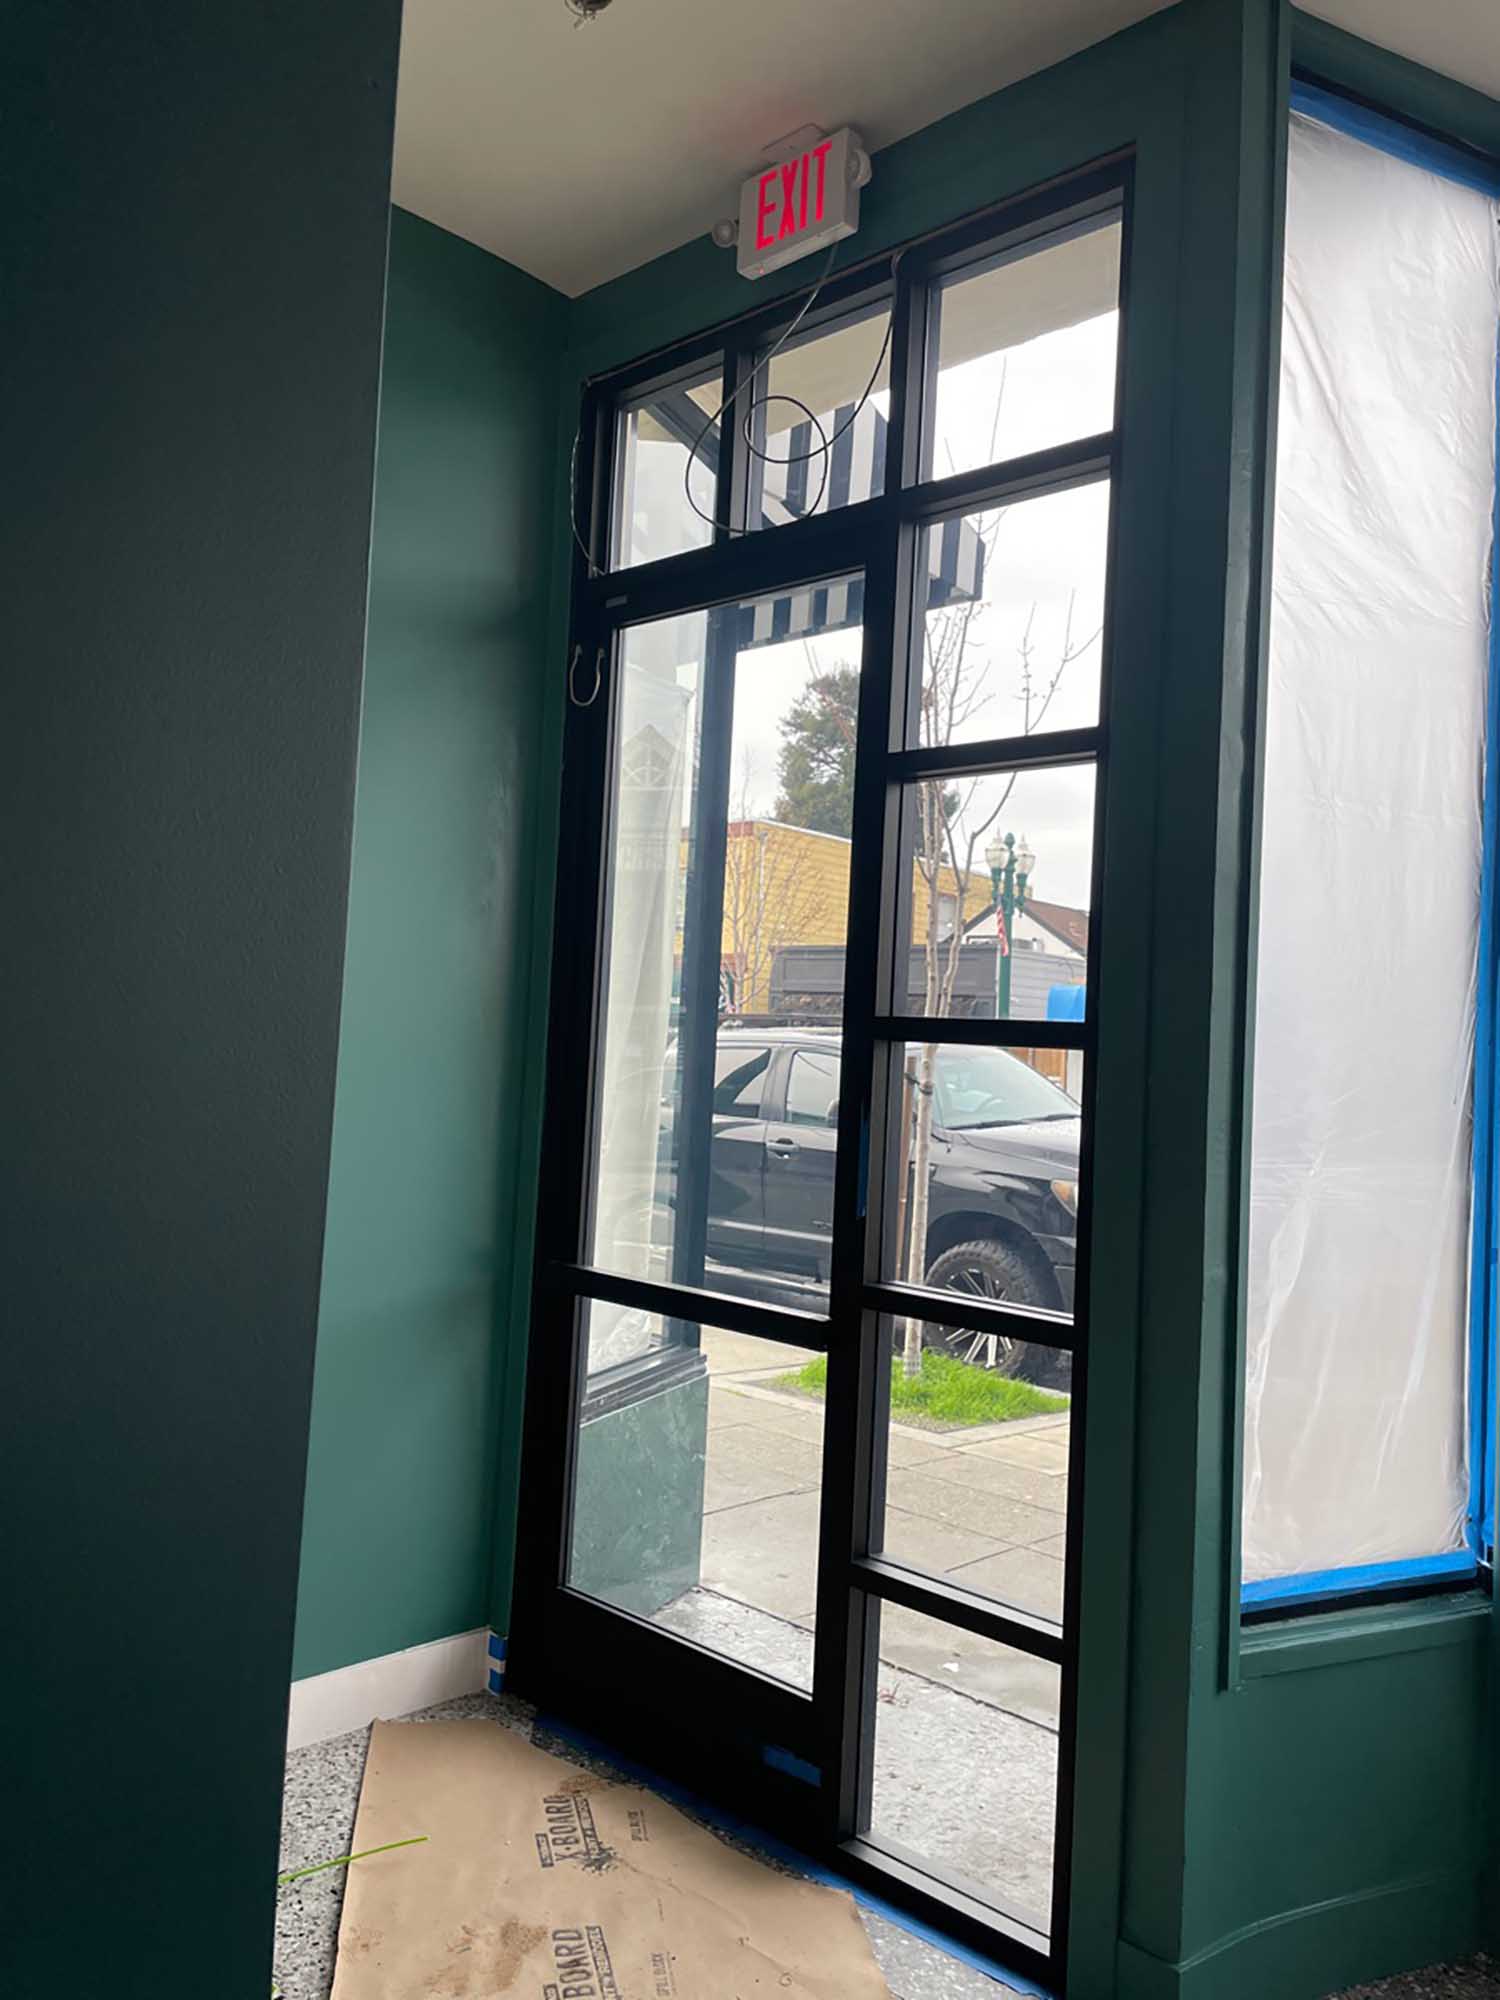 Security Window Film for Alameda, CA Businesses. Installed by ClimatePro.